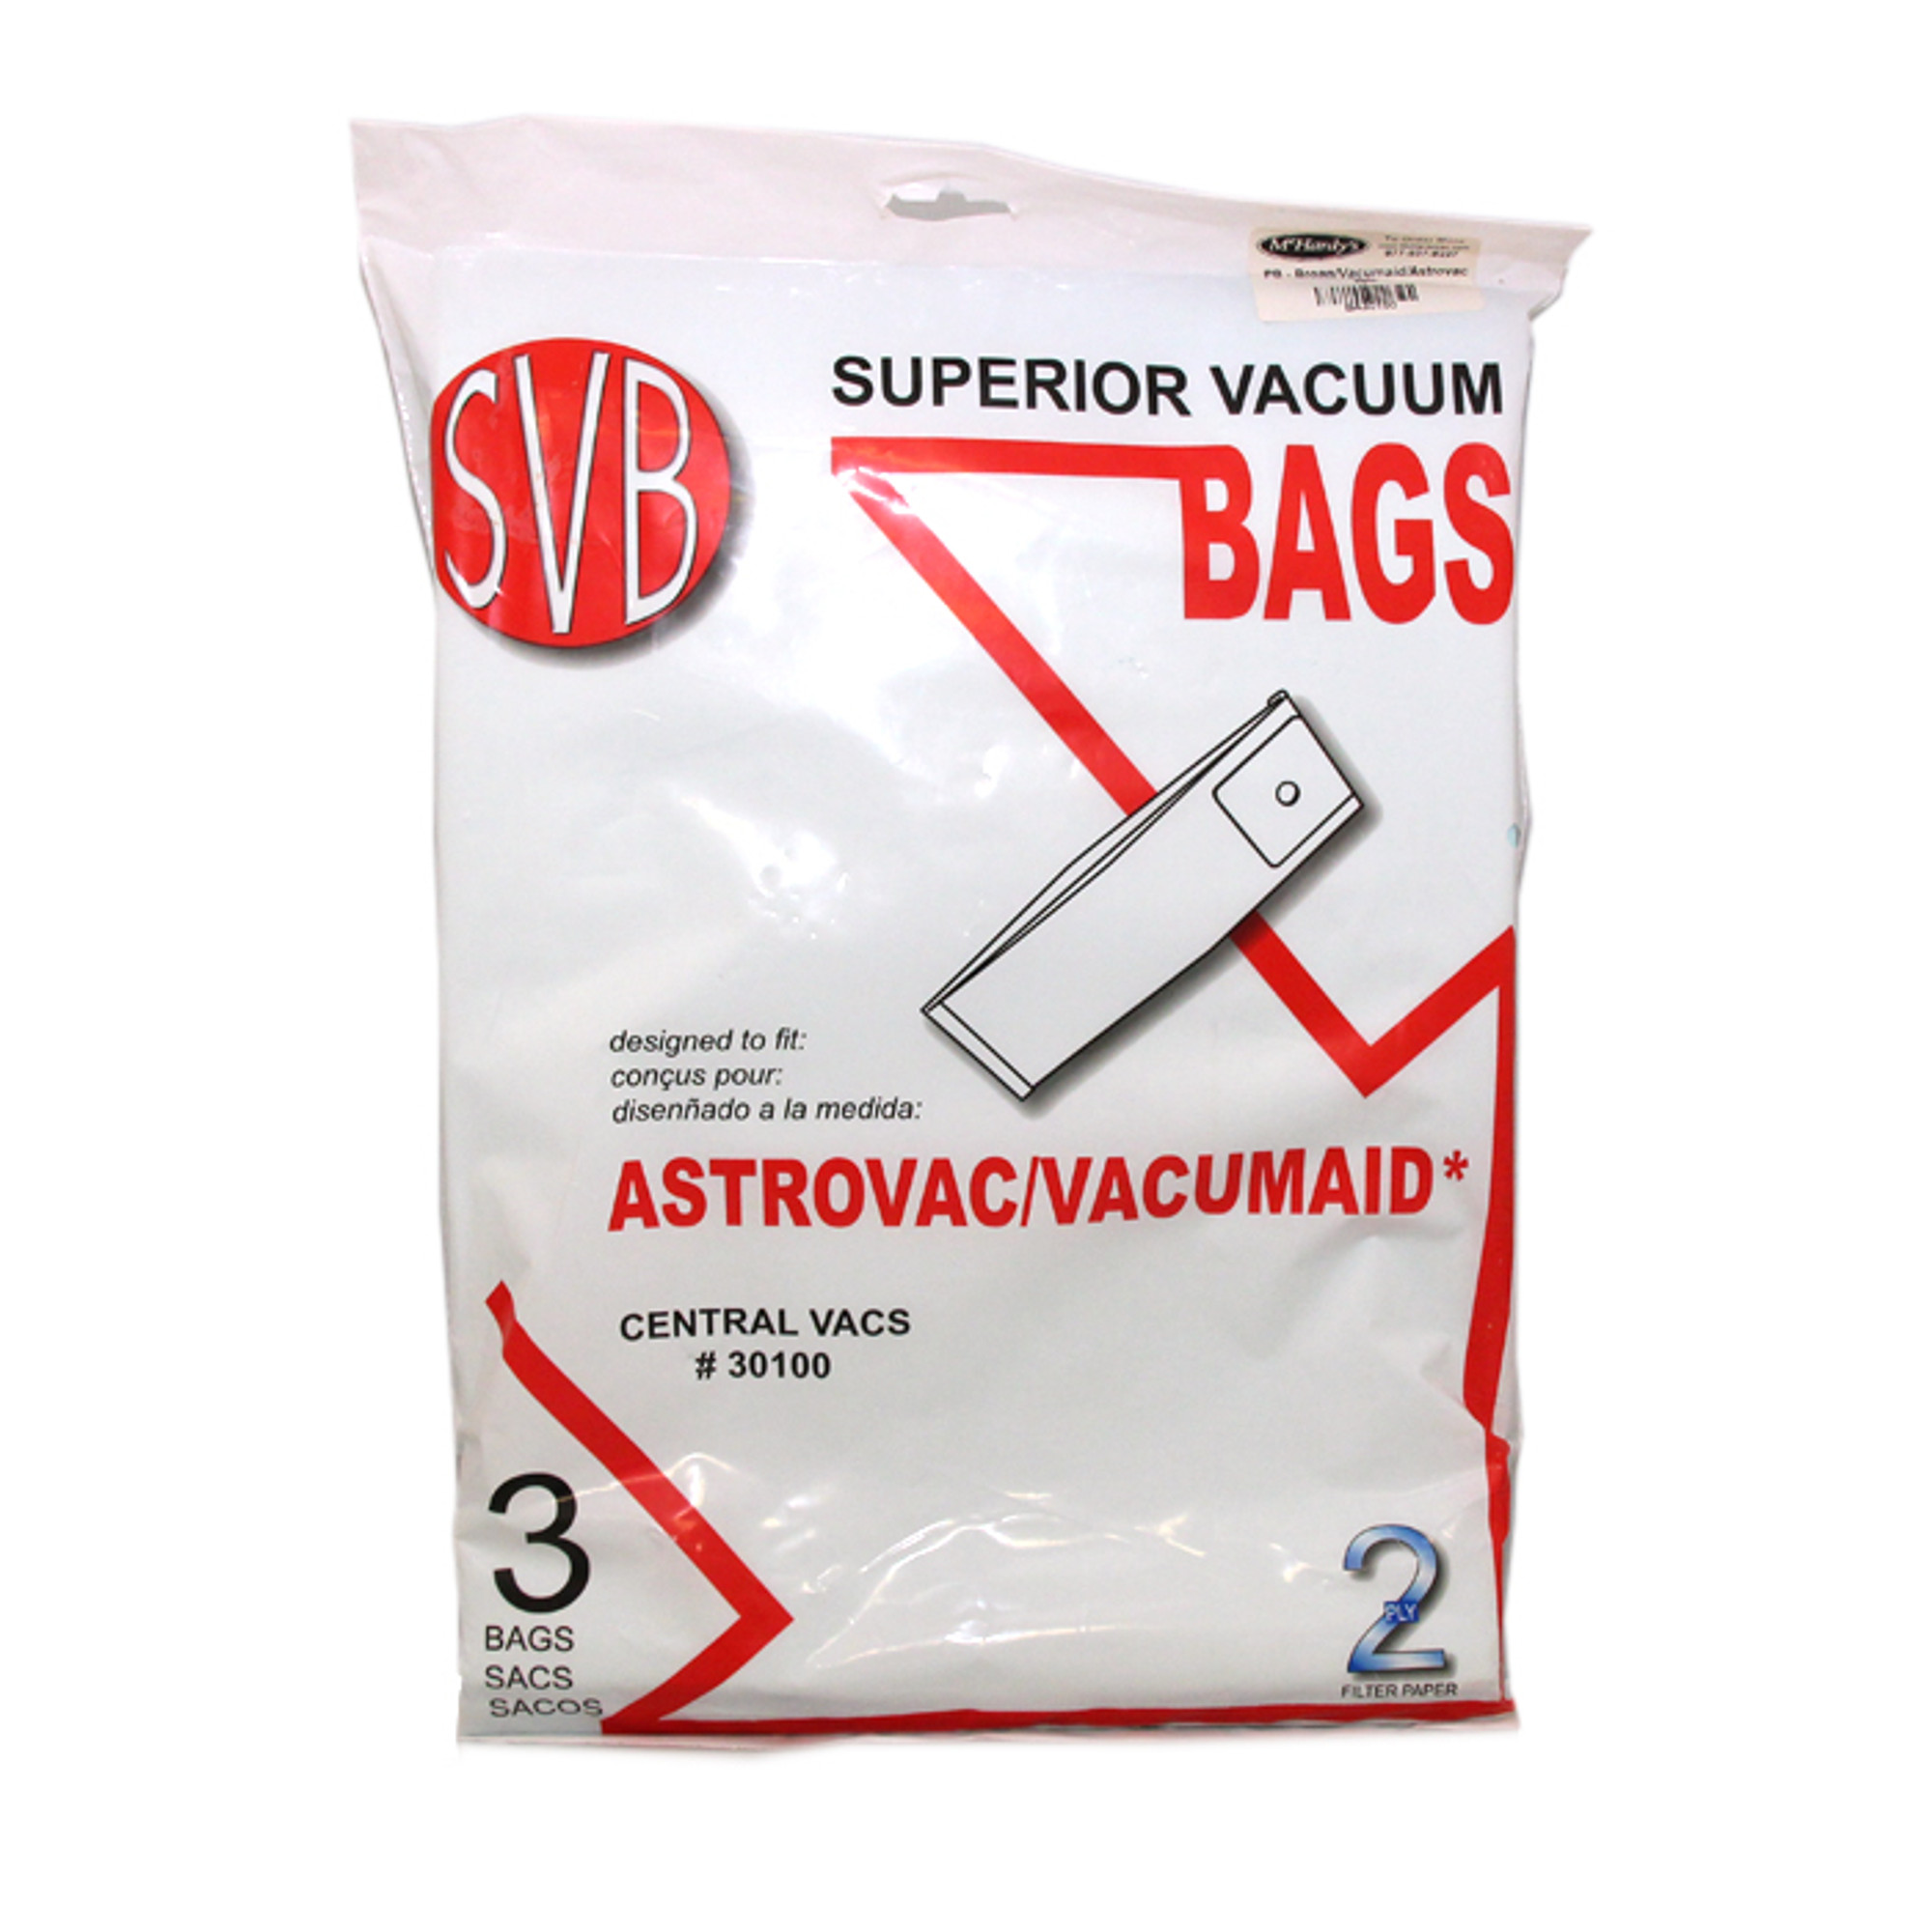 HPB1 Sealed Bag (Qty. 3 bags) for VacuMaid Garage Vac, VacuMaid Central  Vacuum, AstroVac & Valet Central Vacuum